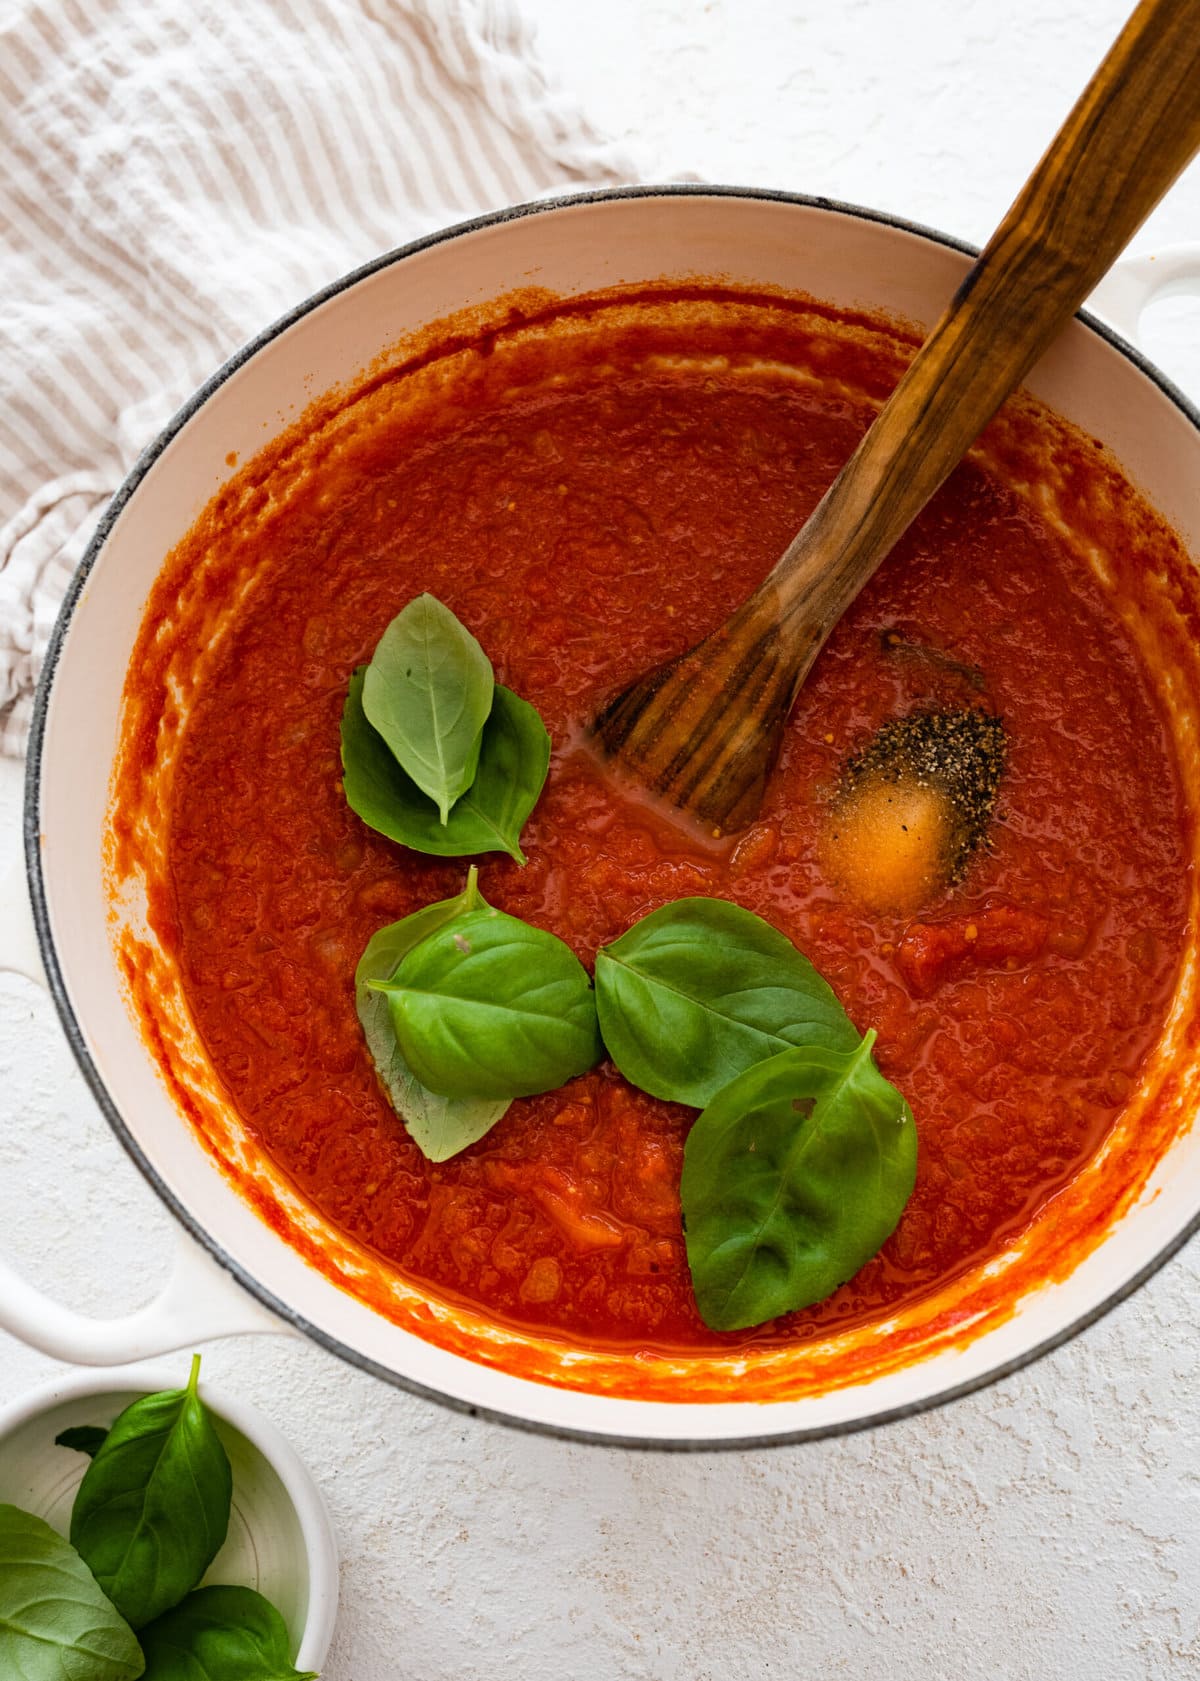 how to make sugo al pomodoro step-by-step photos: adding fresh basil on top of sauce and stirring.